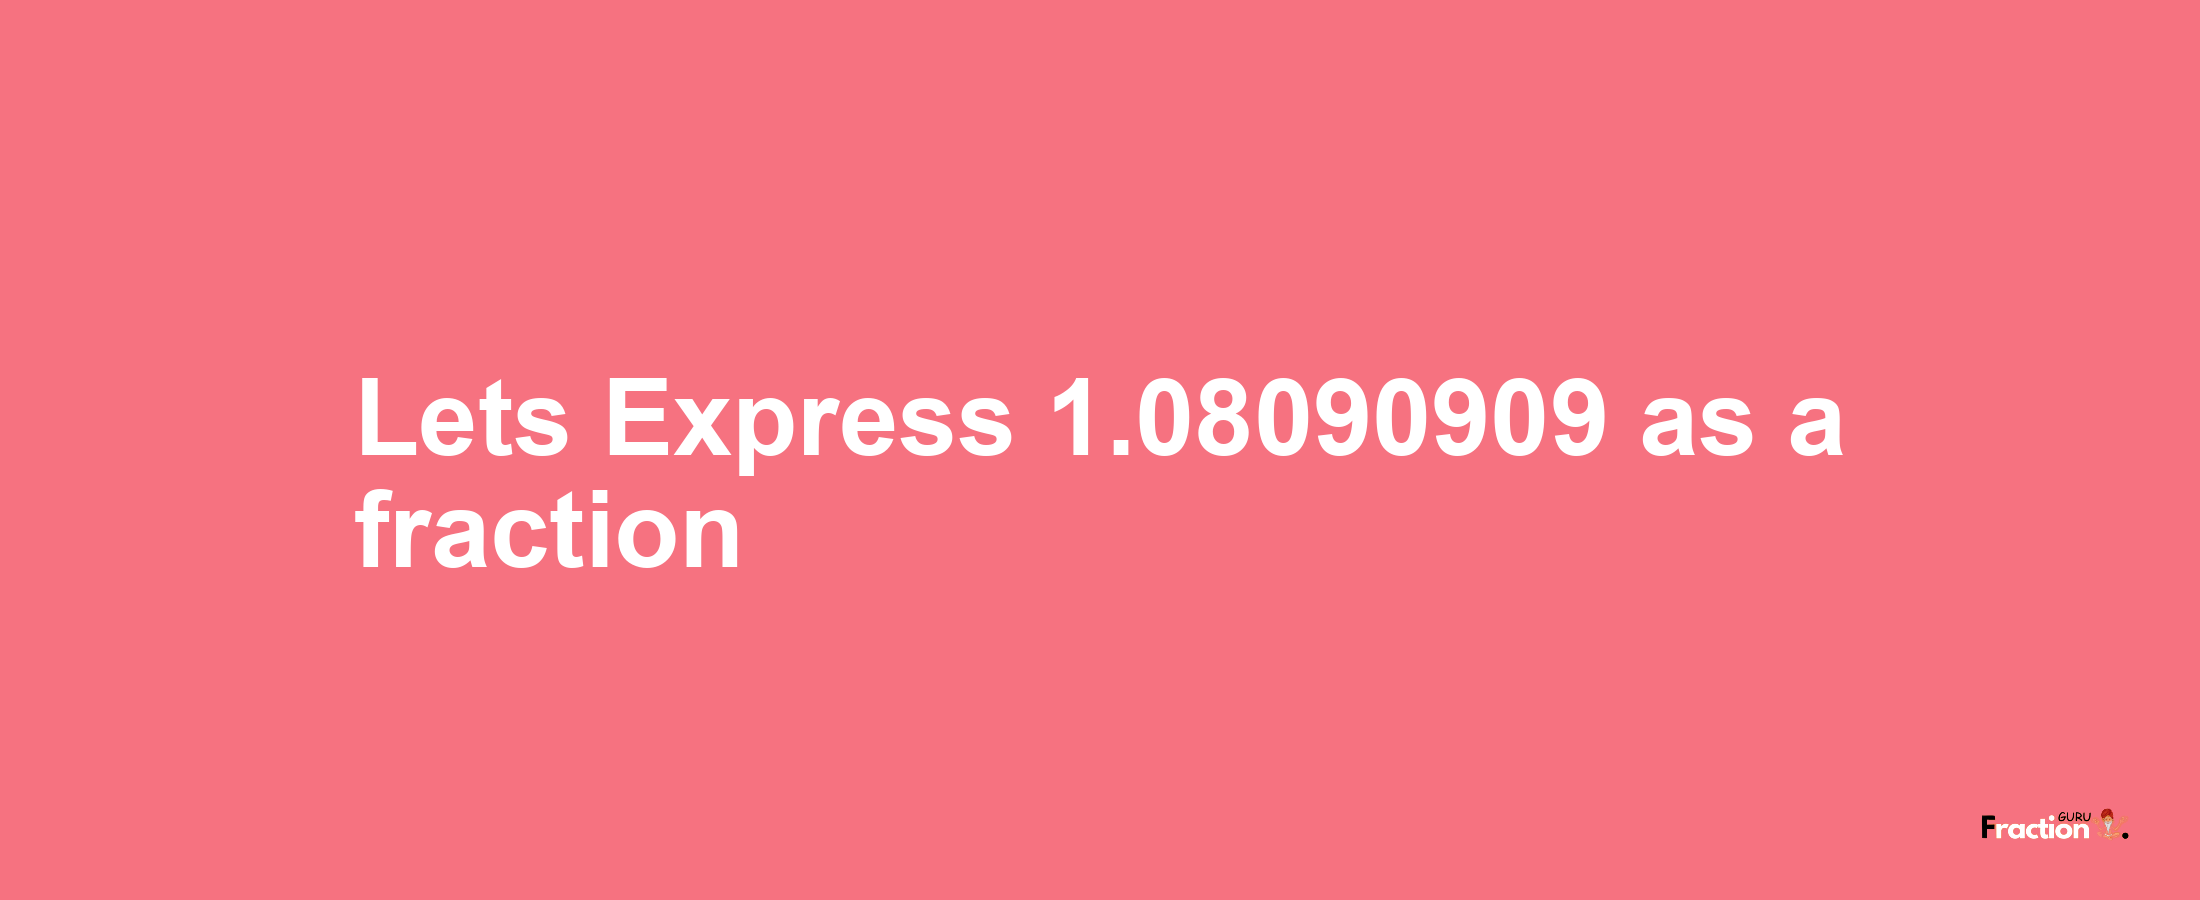 Lets Express 1.08090909 as afraction